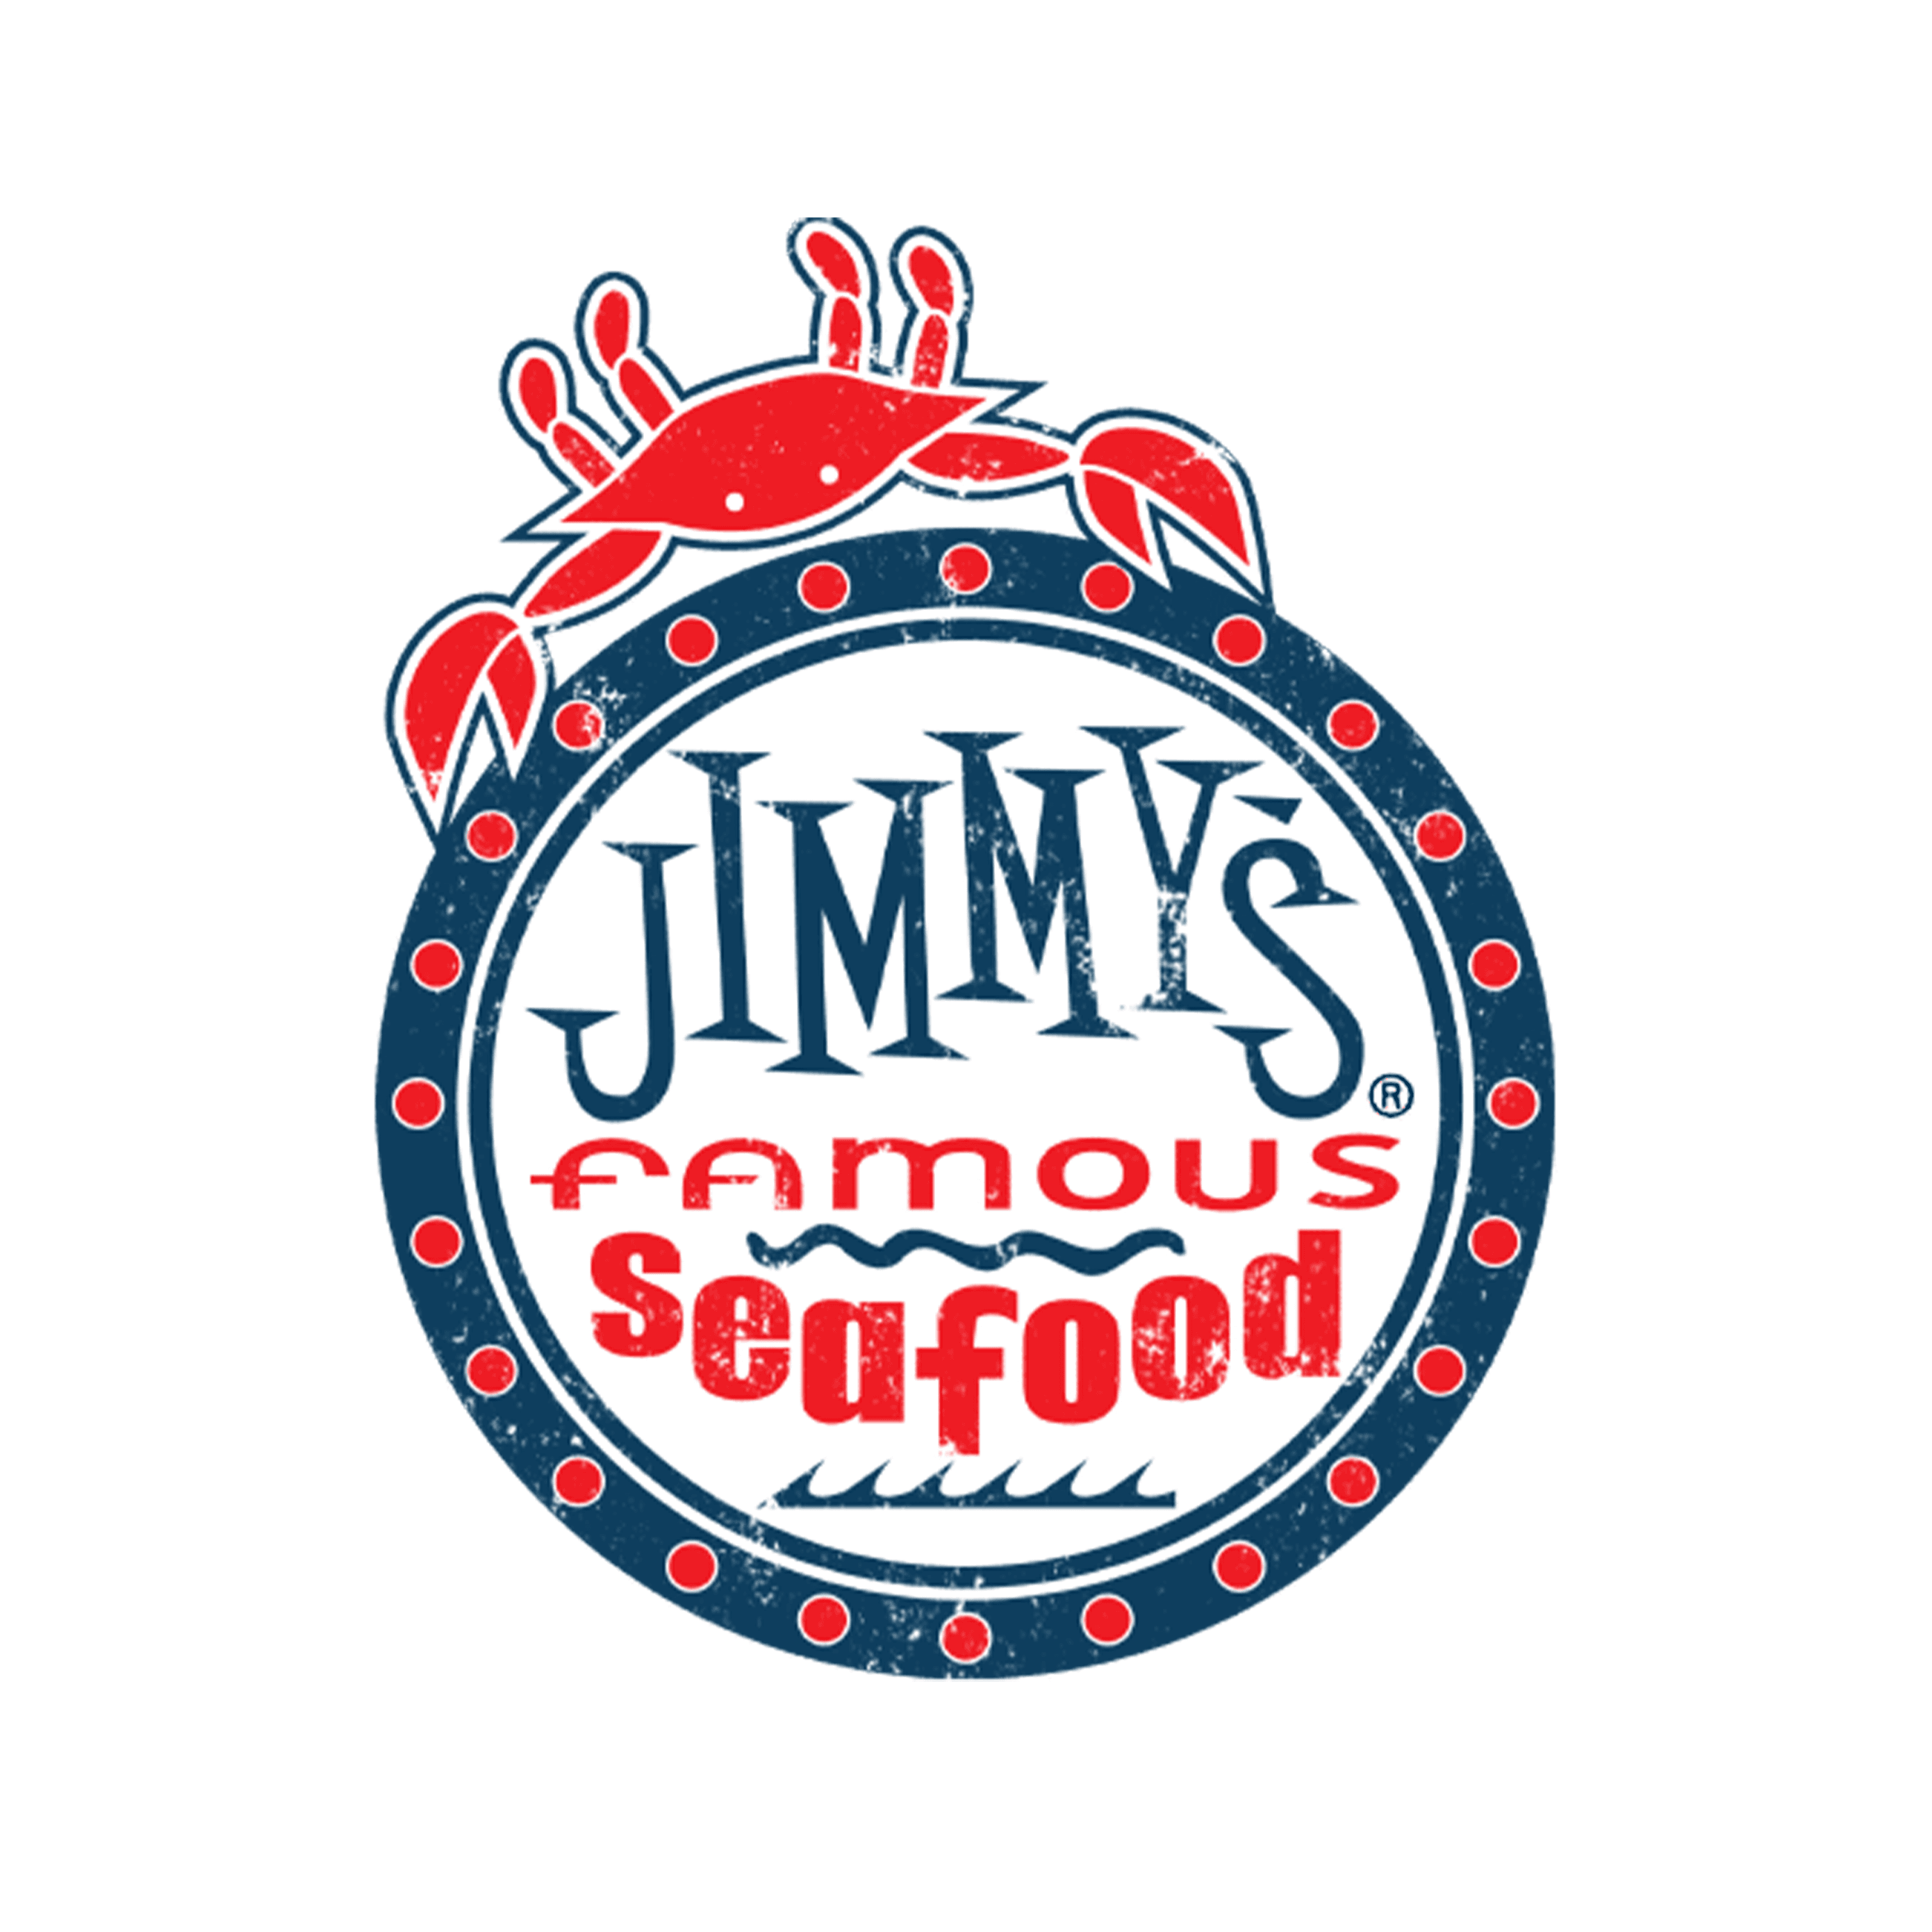 JIMMY'S FAMOUS SEAFOOD